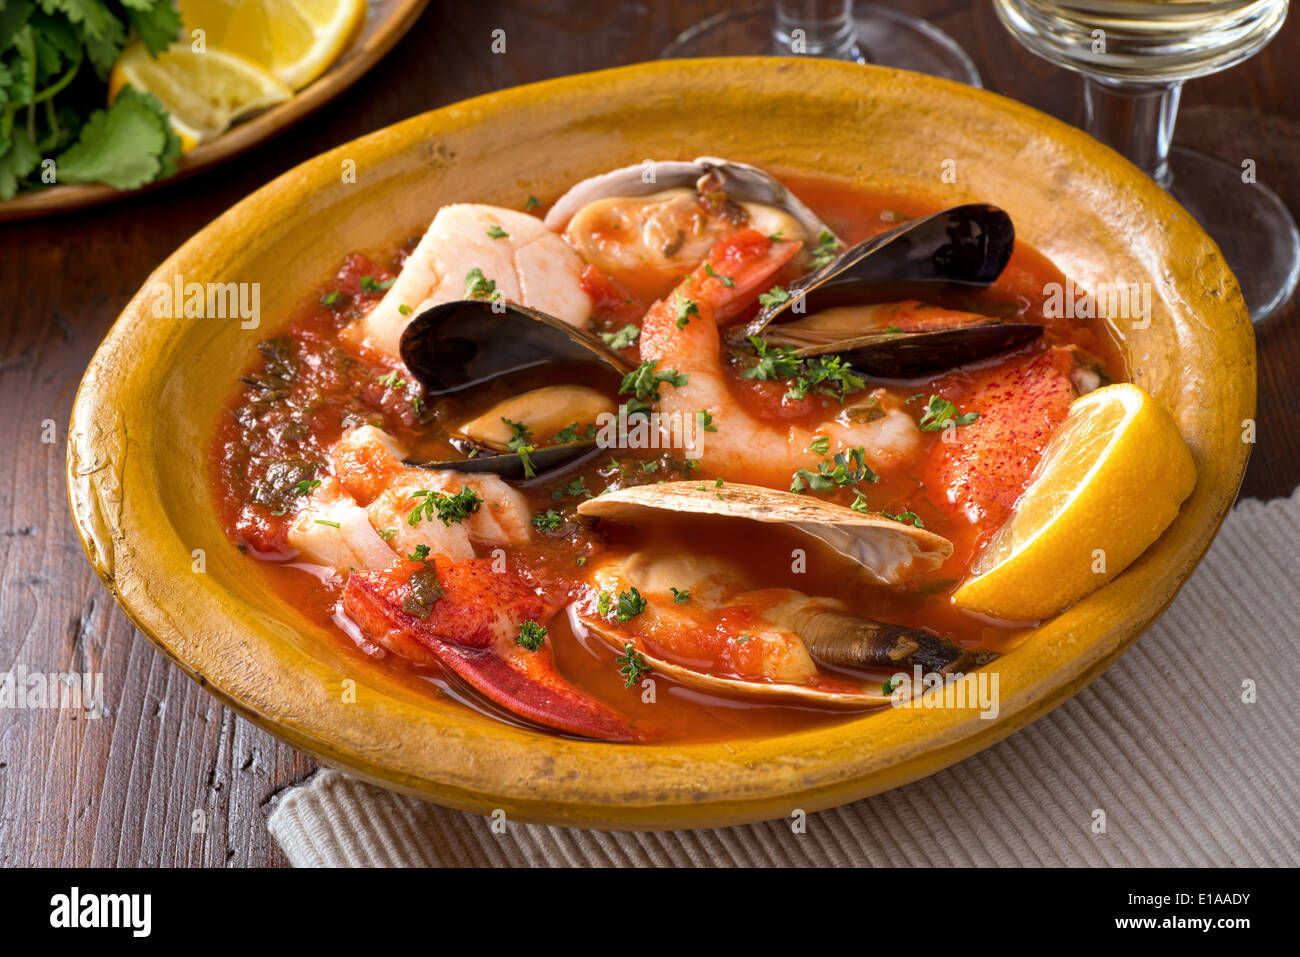 A hearty bowl of rustic mediterranean seafood stew with lobster, shrimp, mussels, clams, scallops, and white fish. Stock Photo